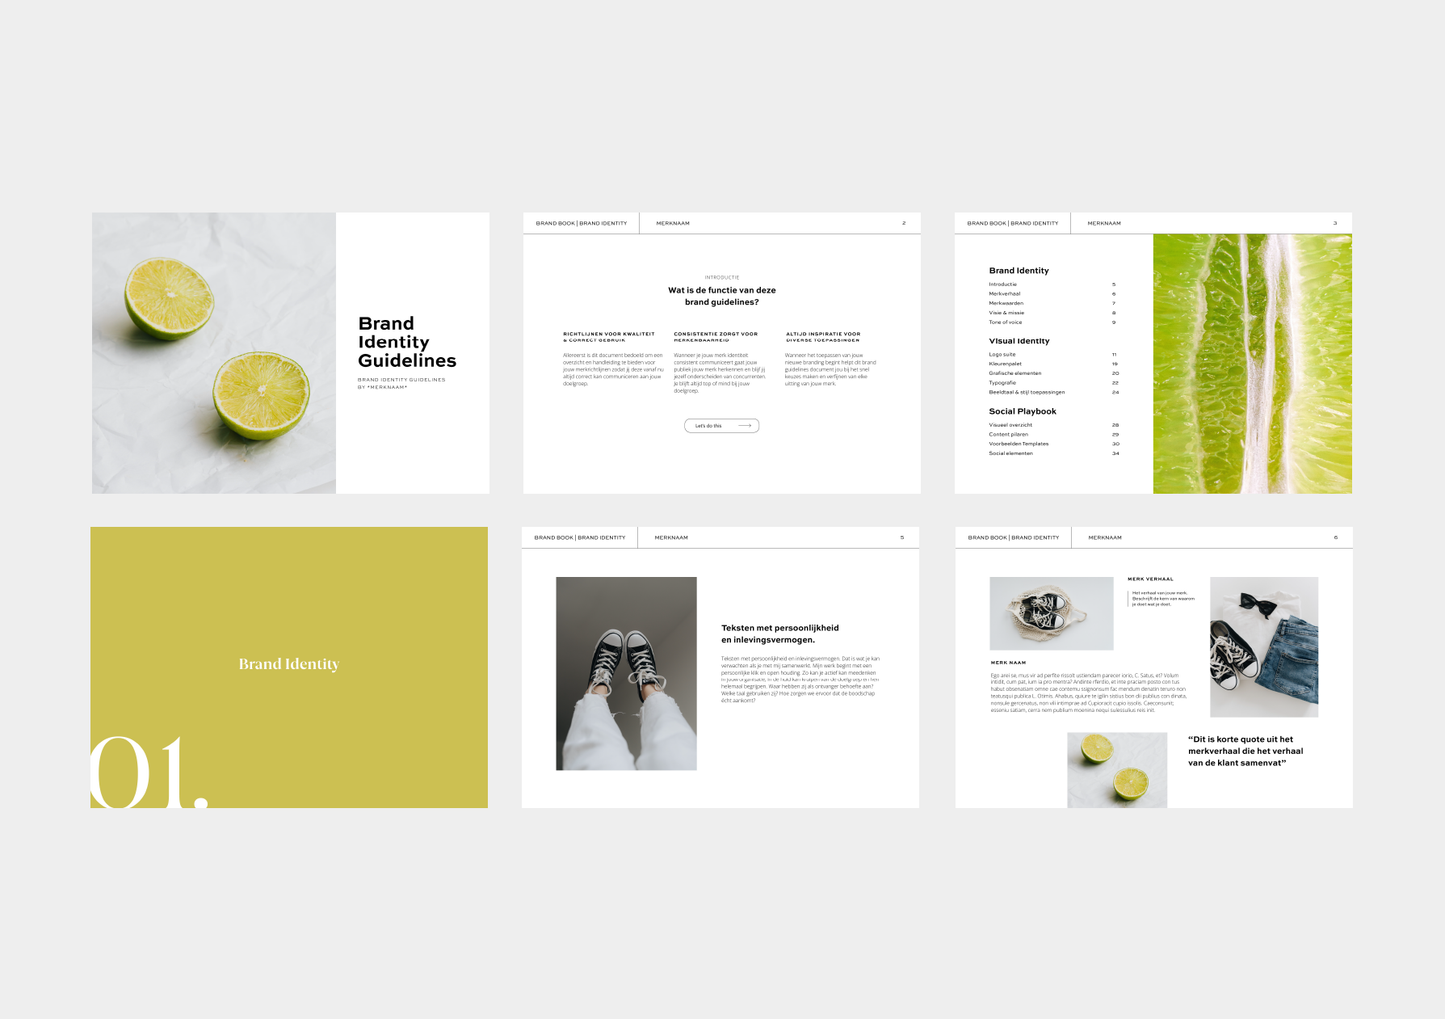 Brand Identity Guidelines | Design template